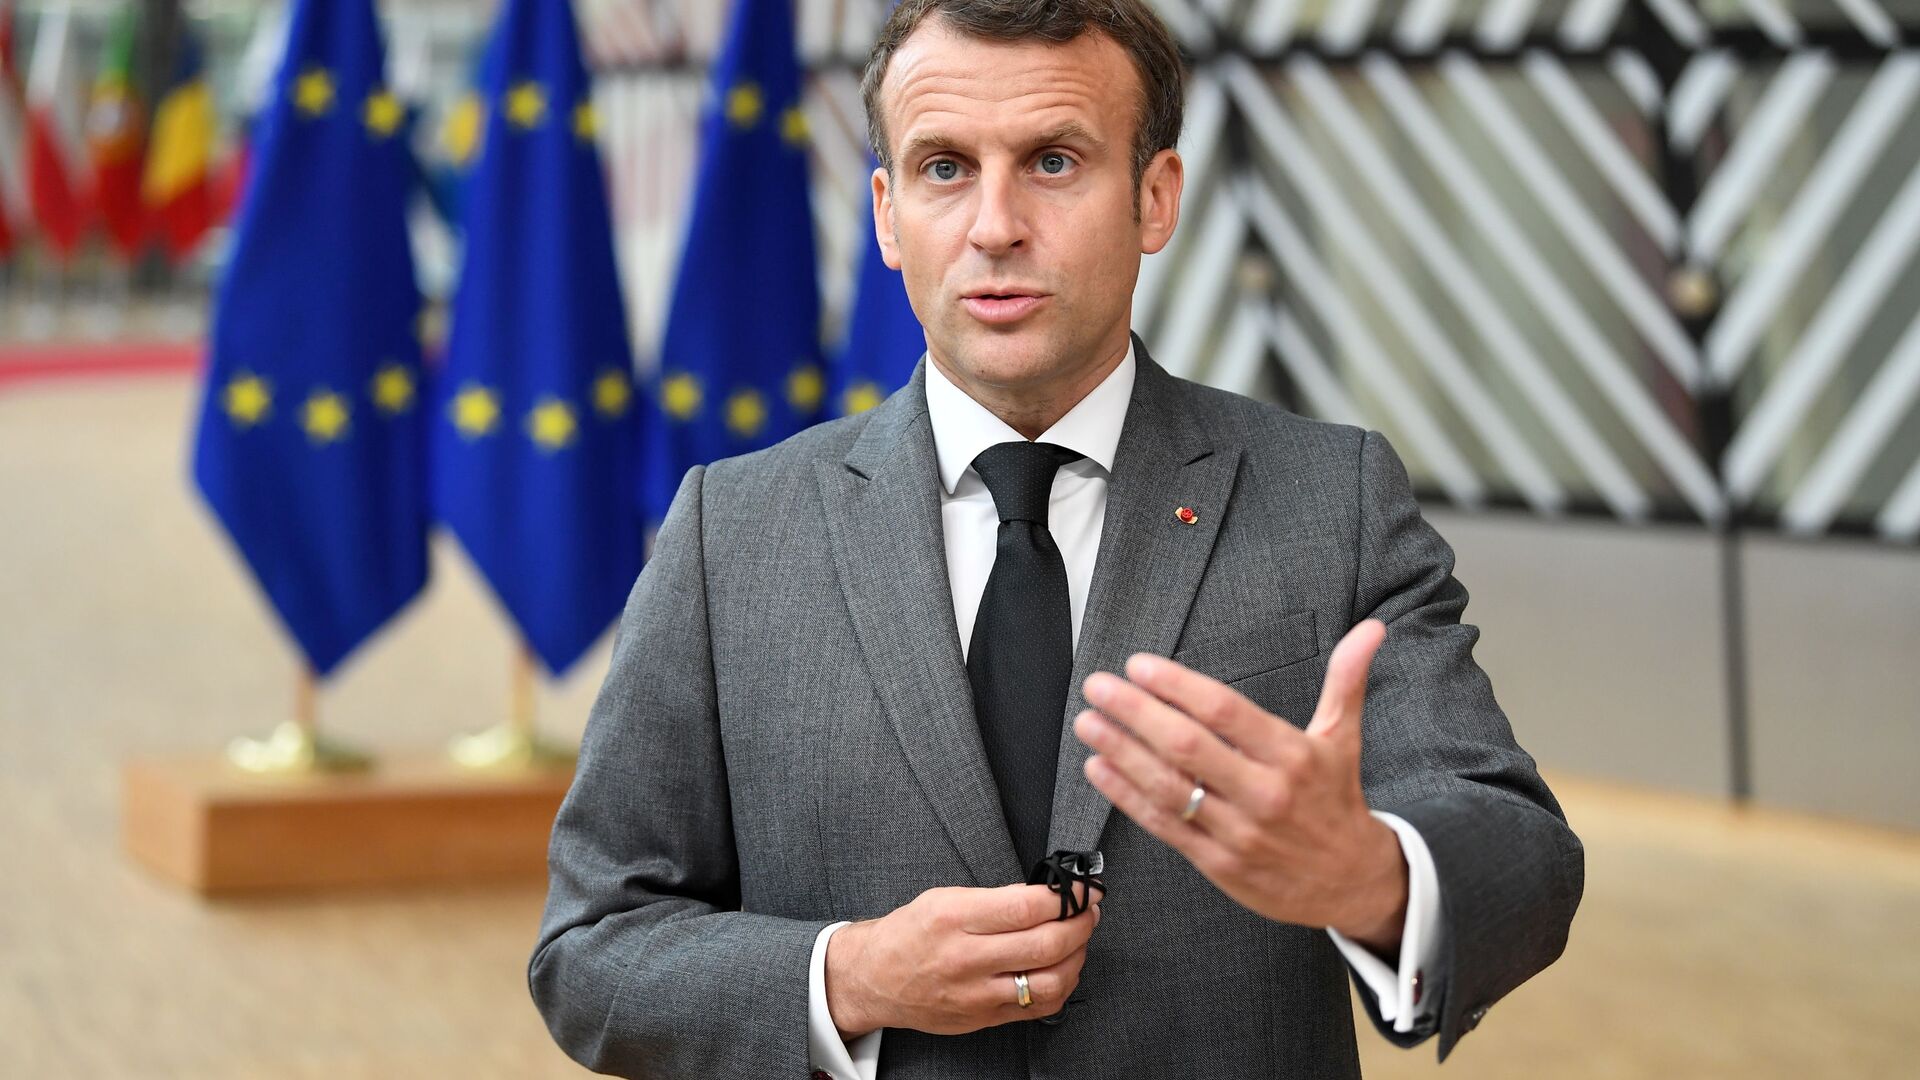 France's President Emmanuel Macron addresses the media as he arrives on the first day of the European Union summit at The European Council Building in Brussels, Belgium June 24, 2021. - Sputnik International, 1920, 04.02.2022